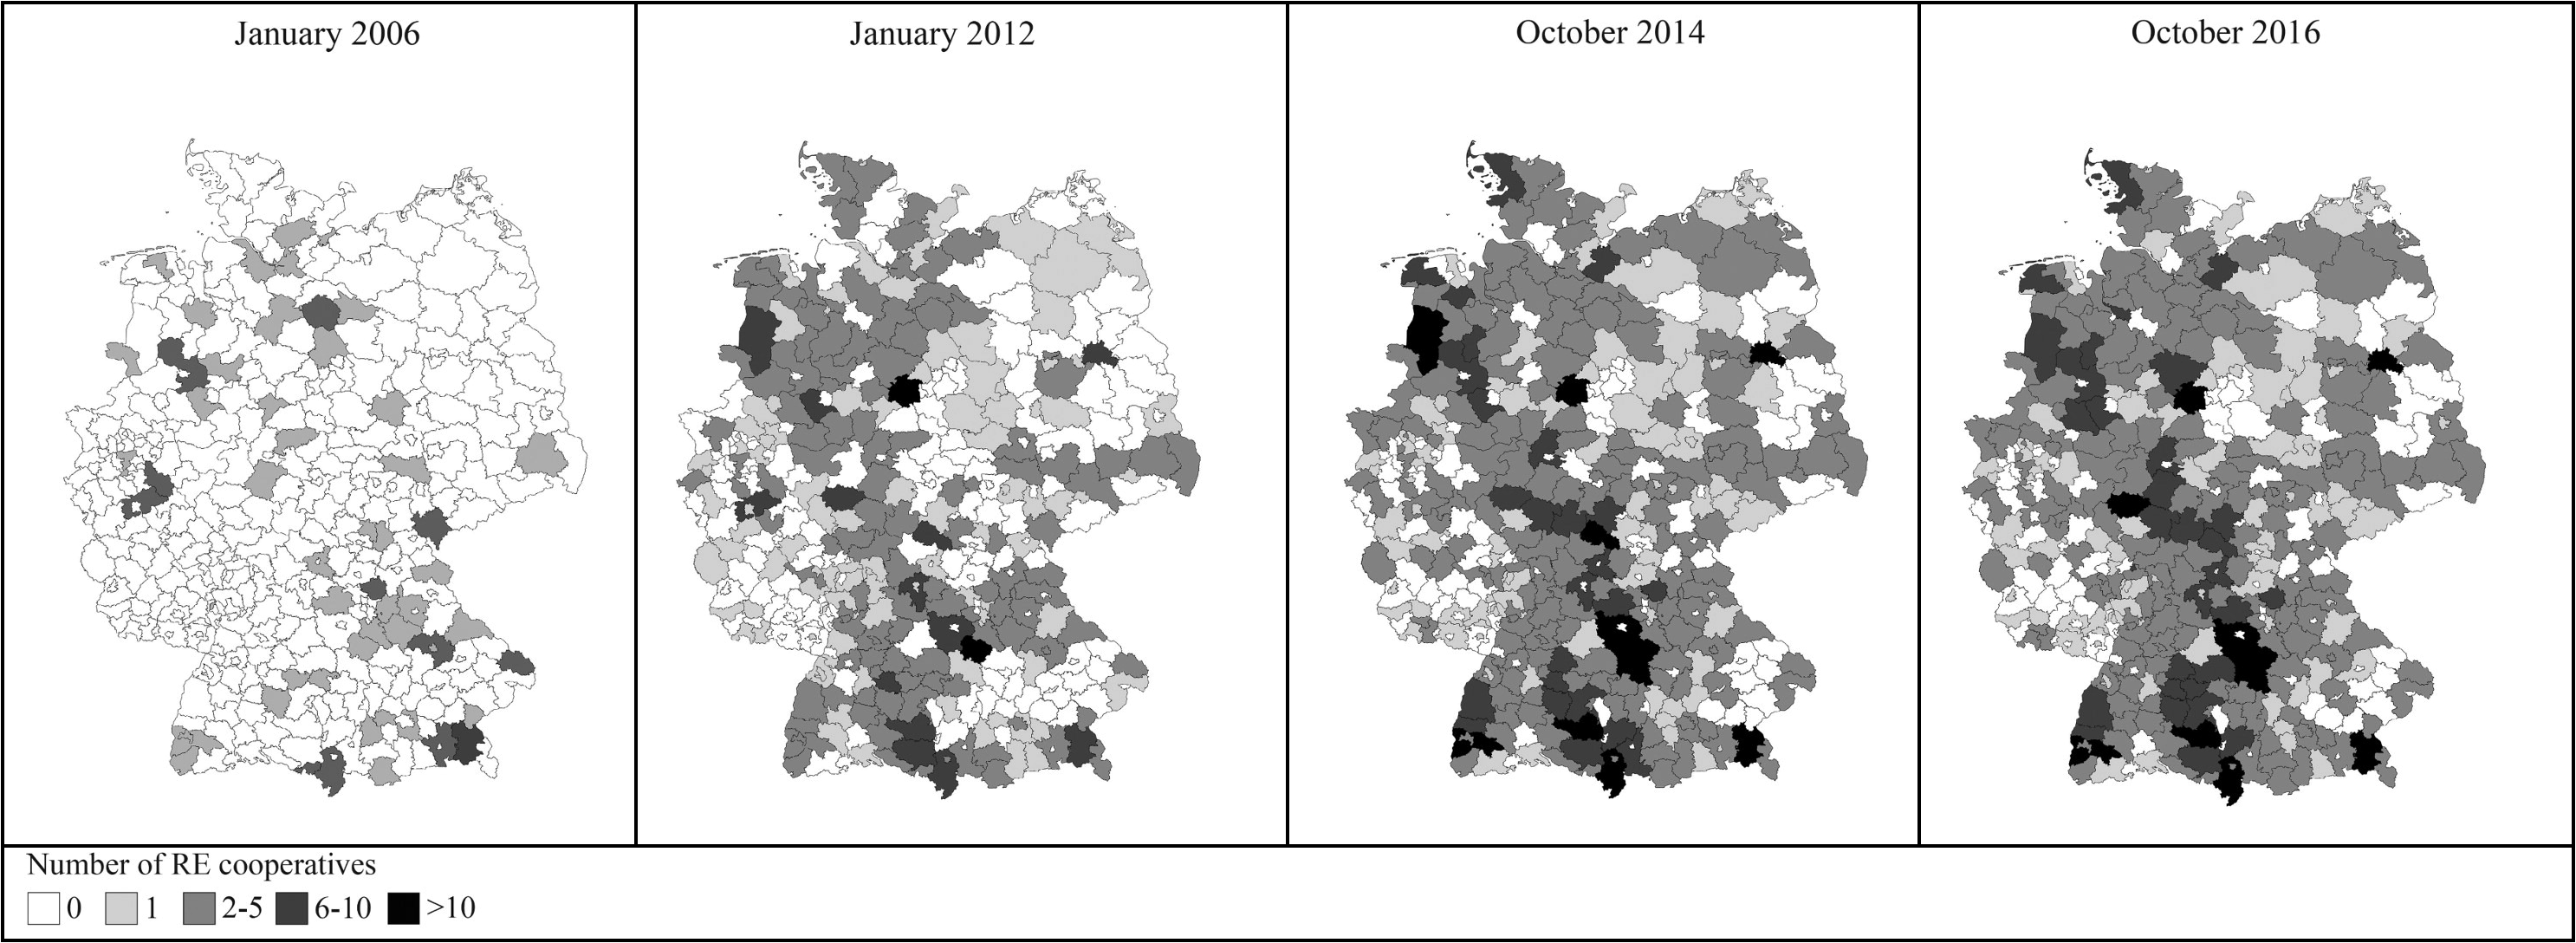 REScoops in Germany, 2006-2016.